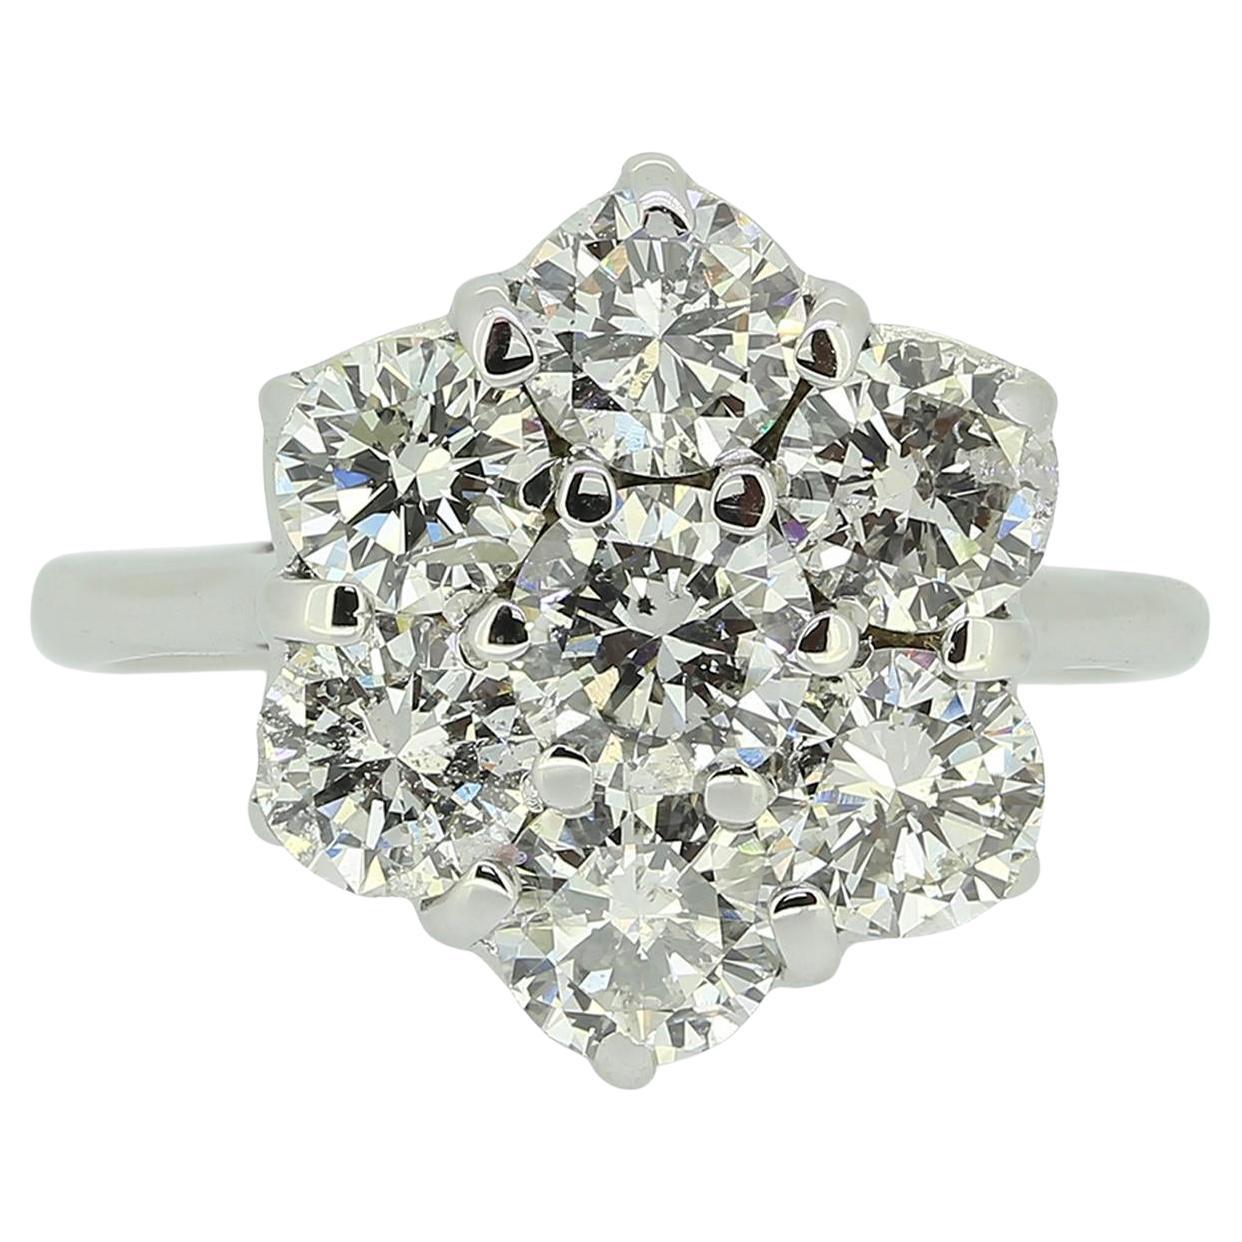 2.52 Carat Diamond Daisy Cluster Ring For Sale